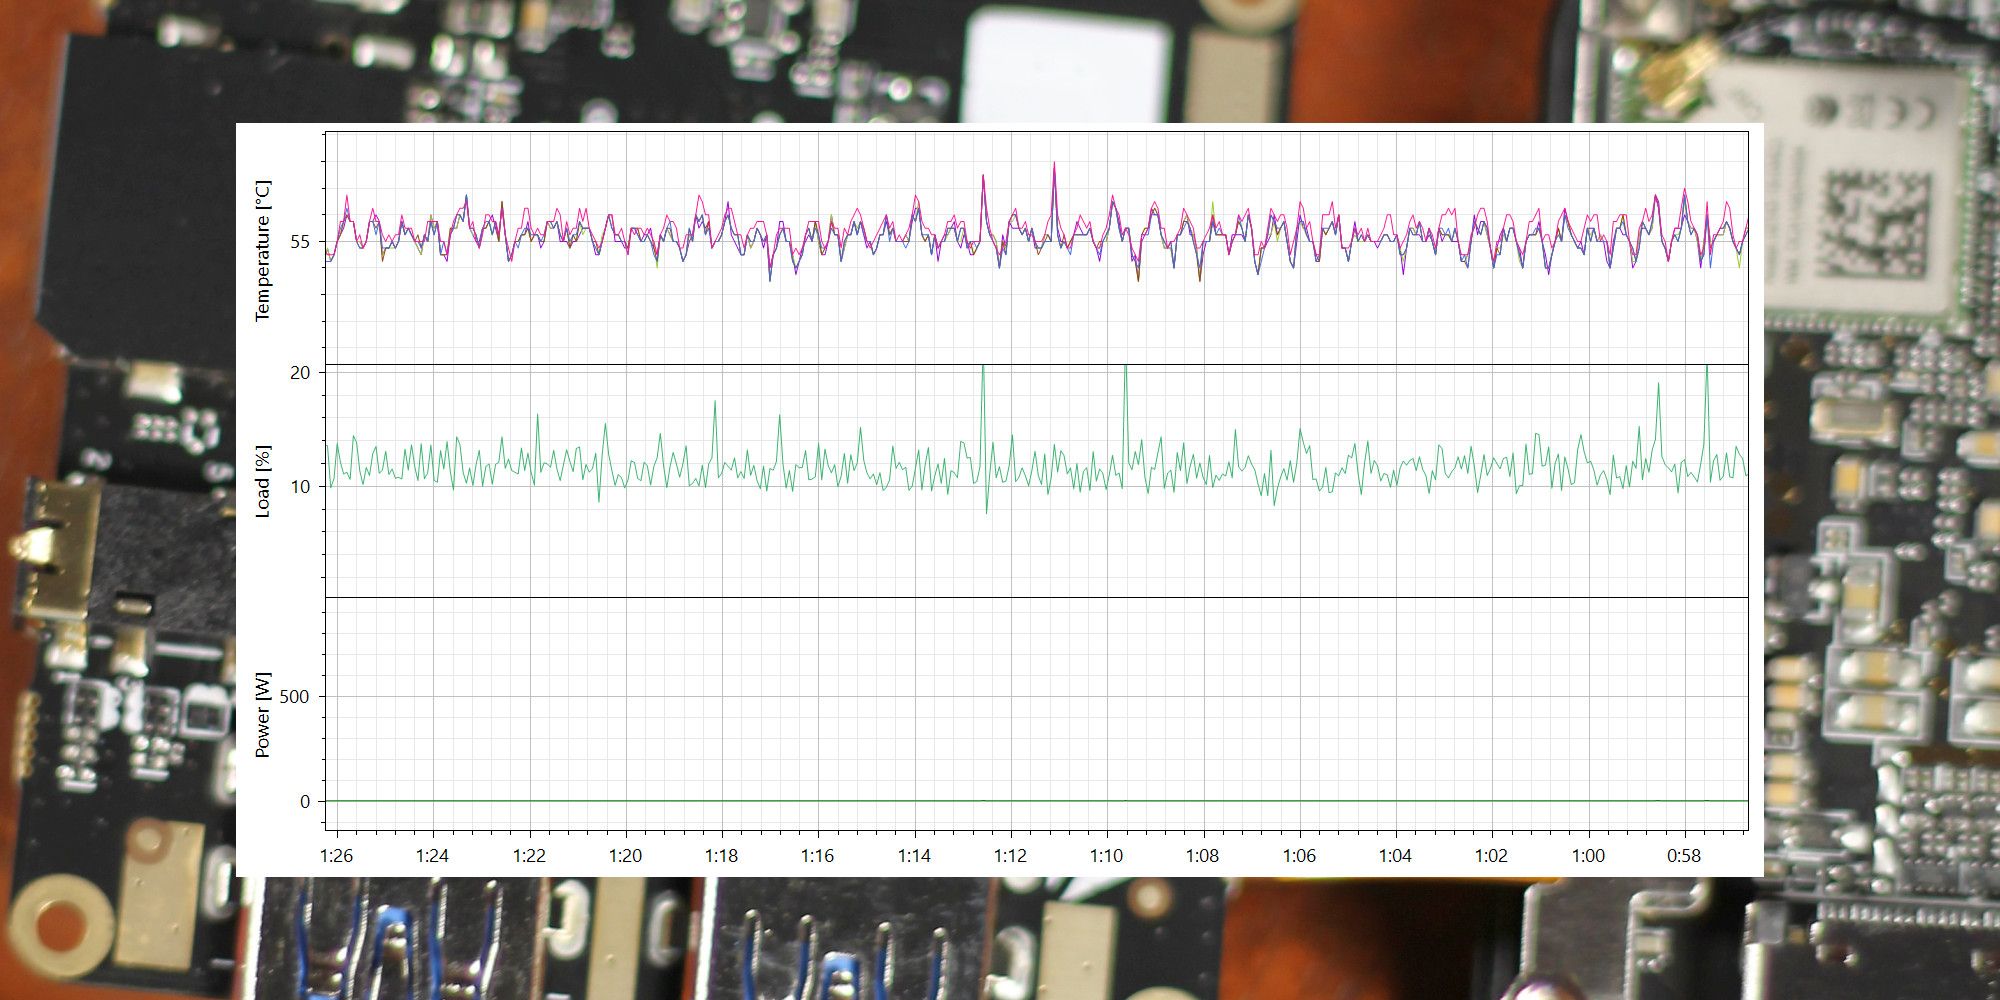 power consumption, temperature, and processor frequency